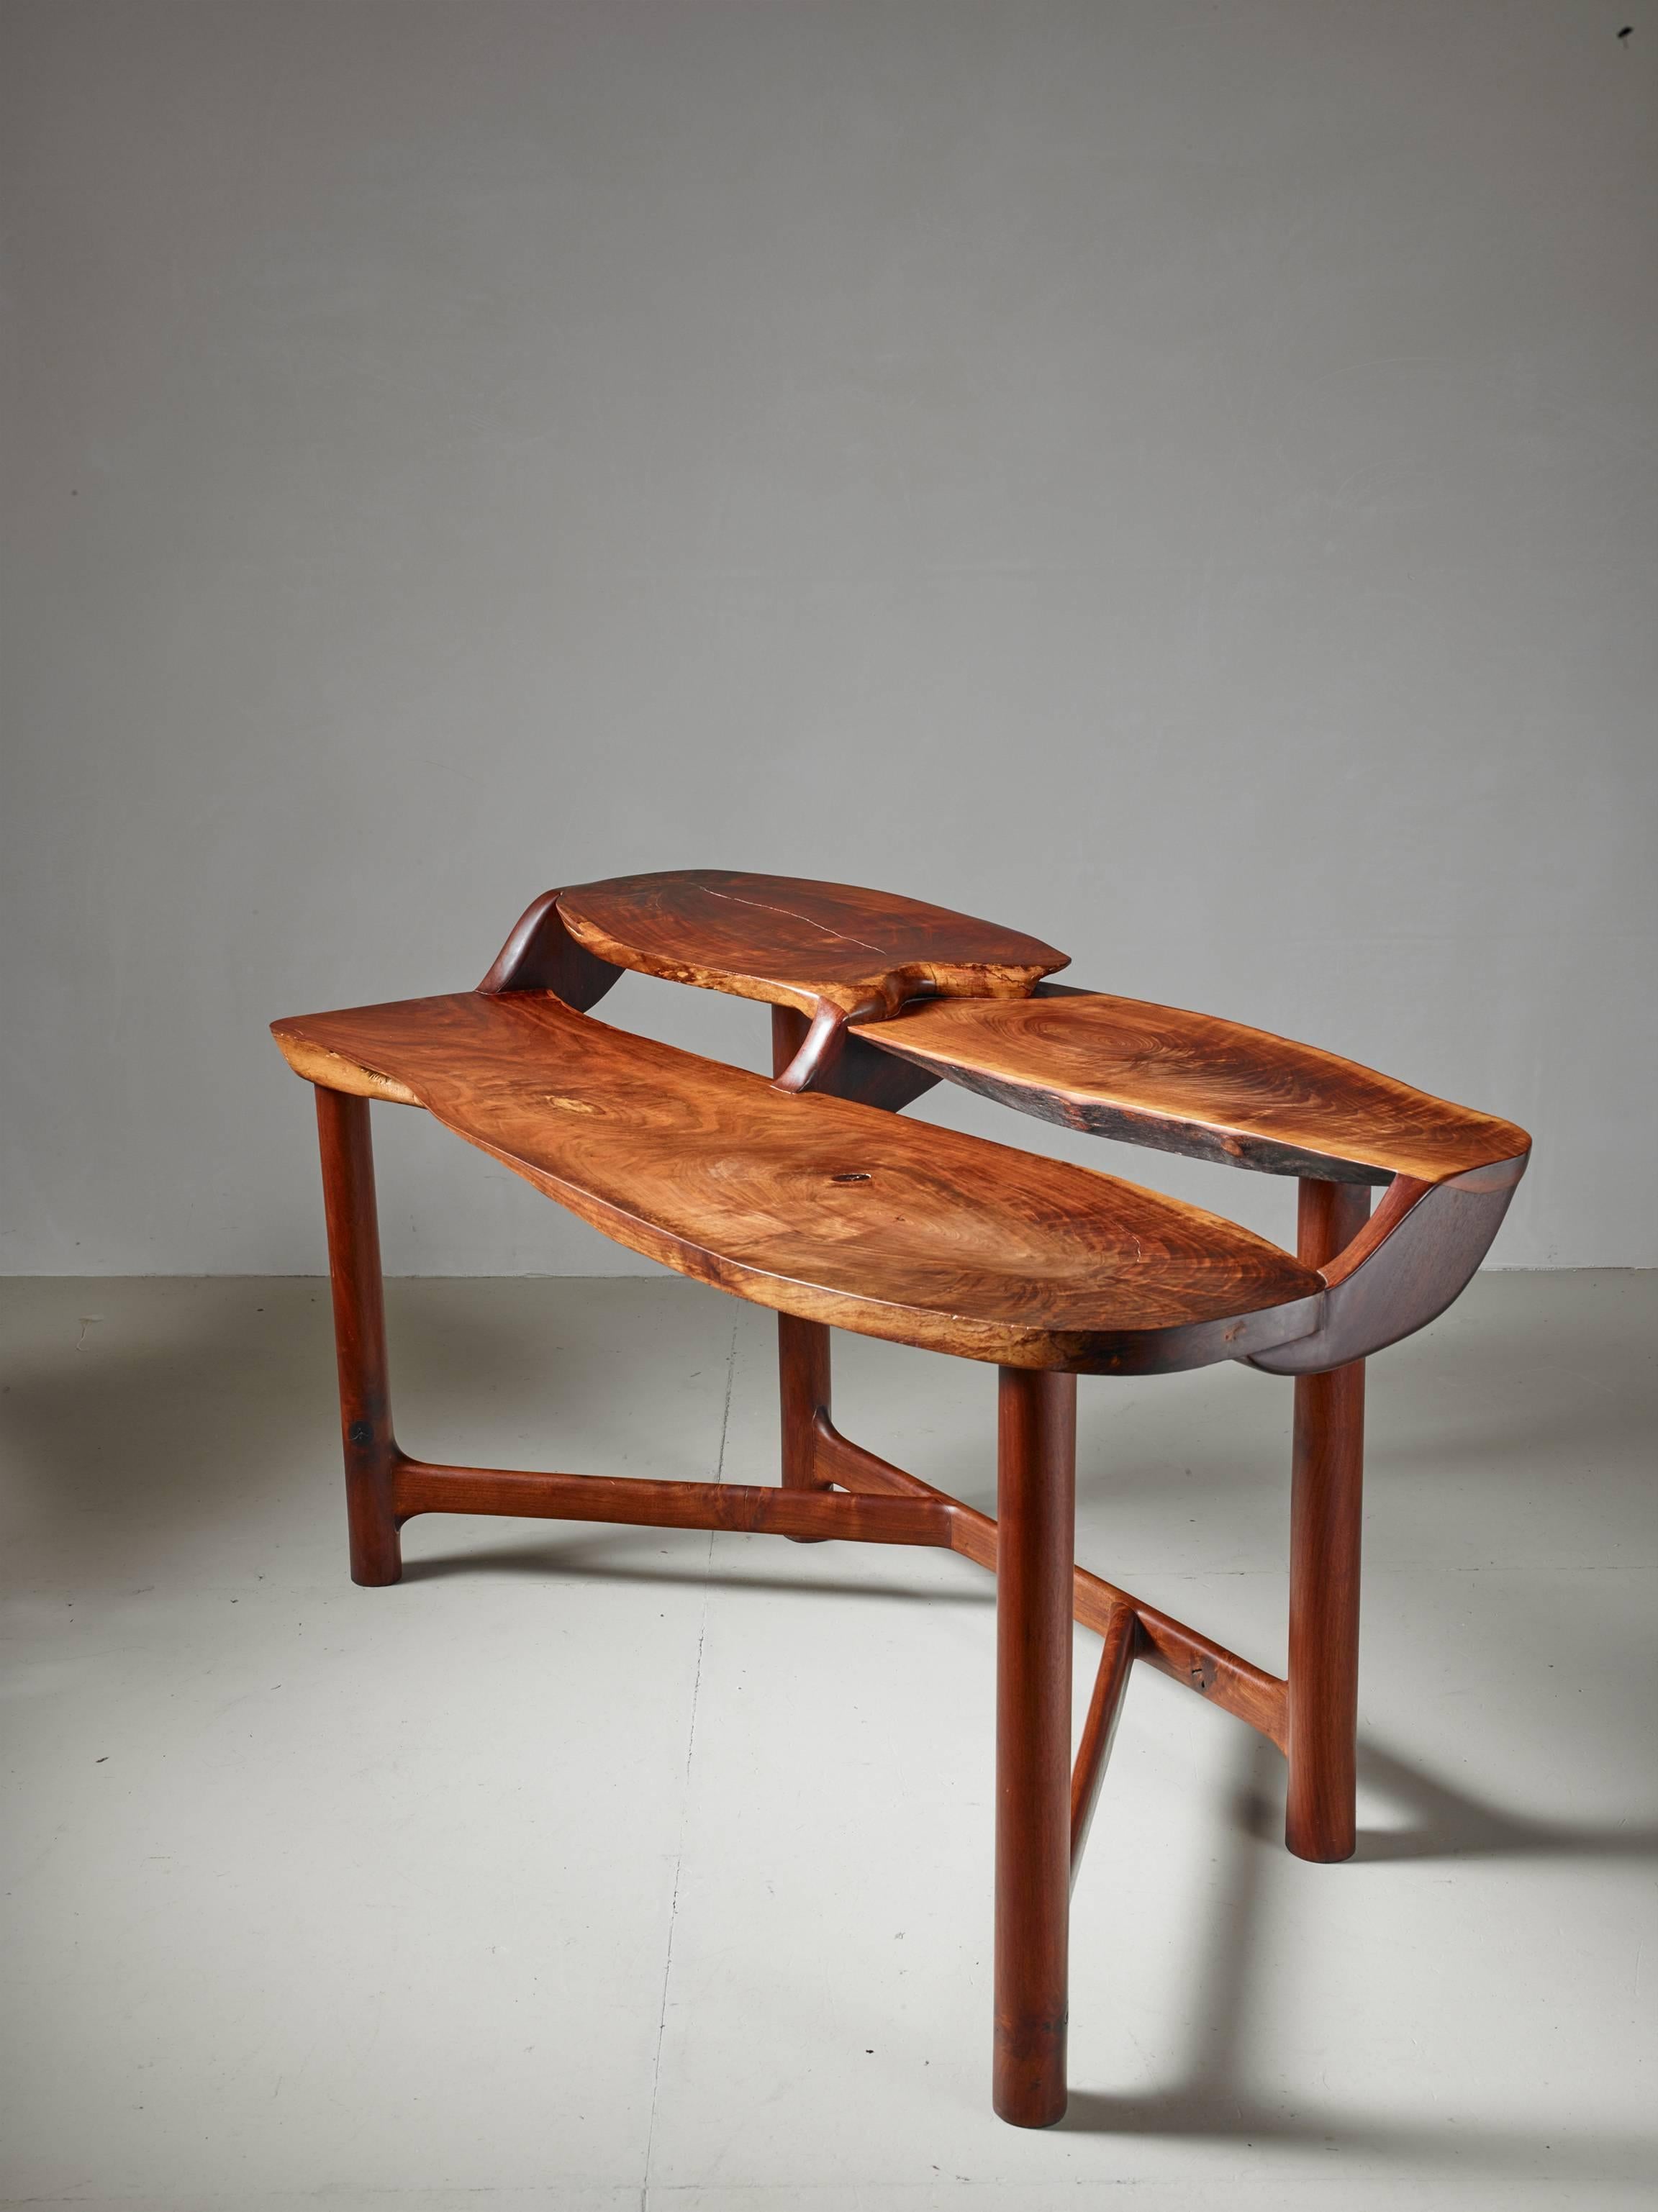 A studio crafted and sculptural wooden desk in walnut by American woodworker Ejner Pagh. The desk has a level for writing and two higher levels for storage. The desk is signed by Pagh.
This piece was bought directly from Ejnar Pagh and was made in